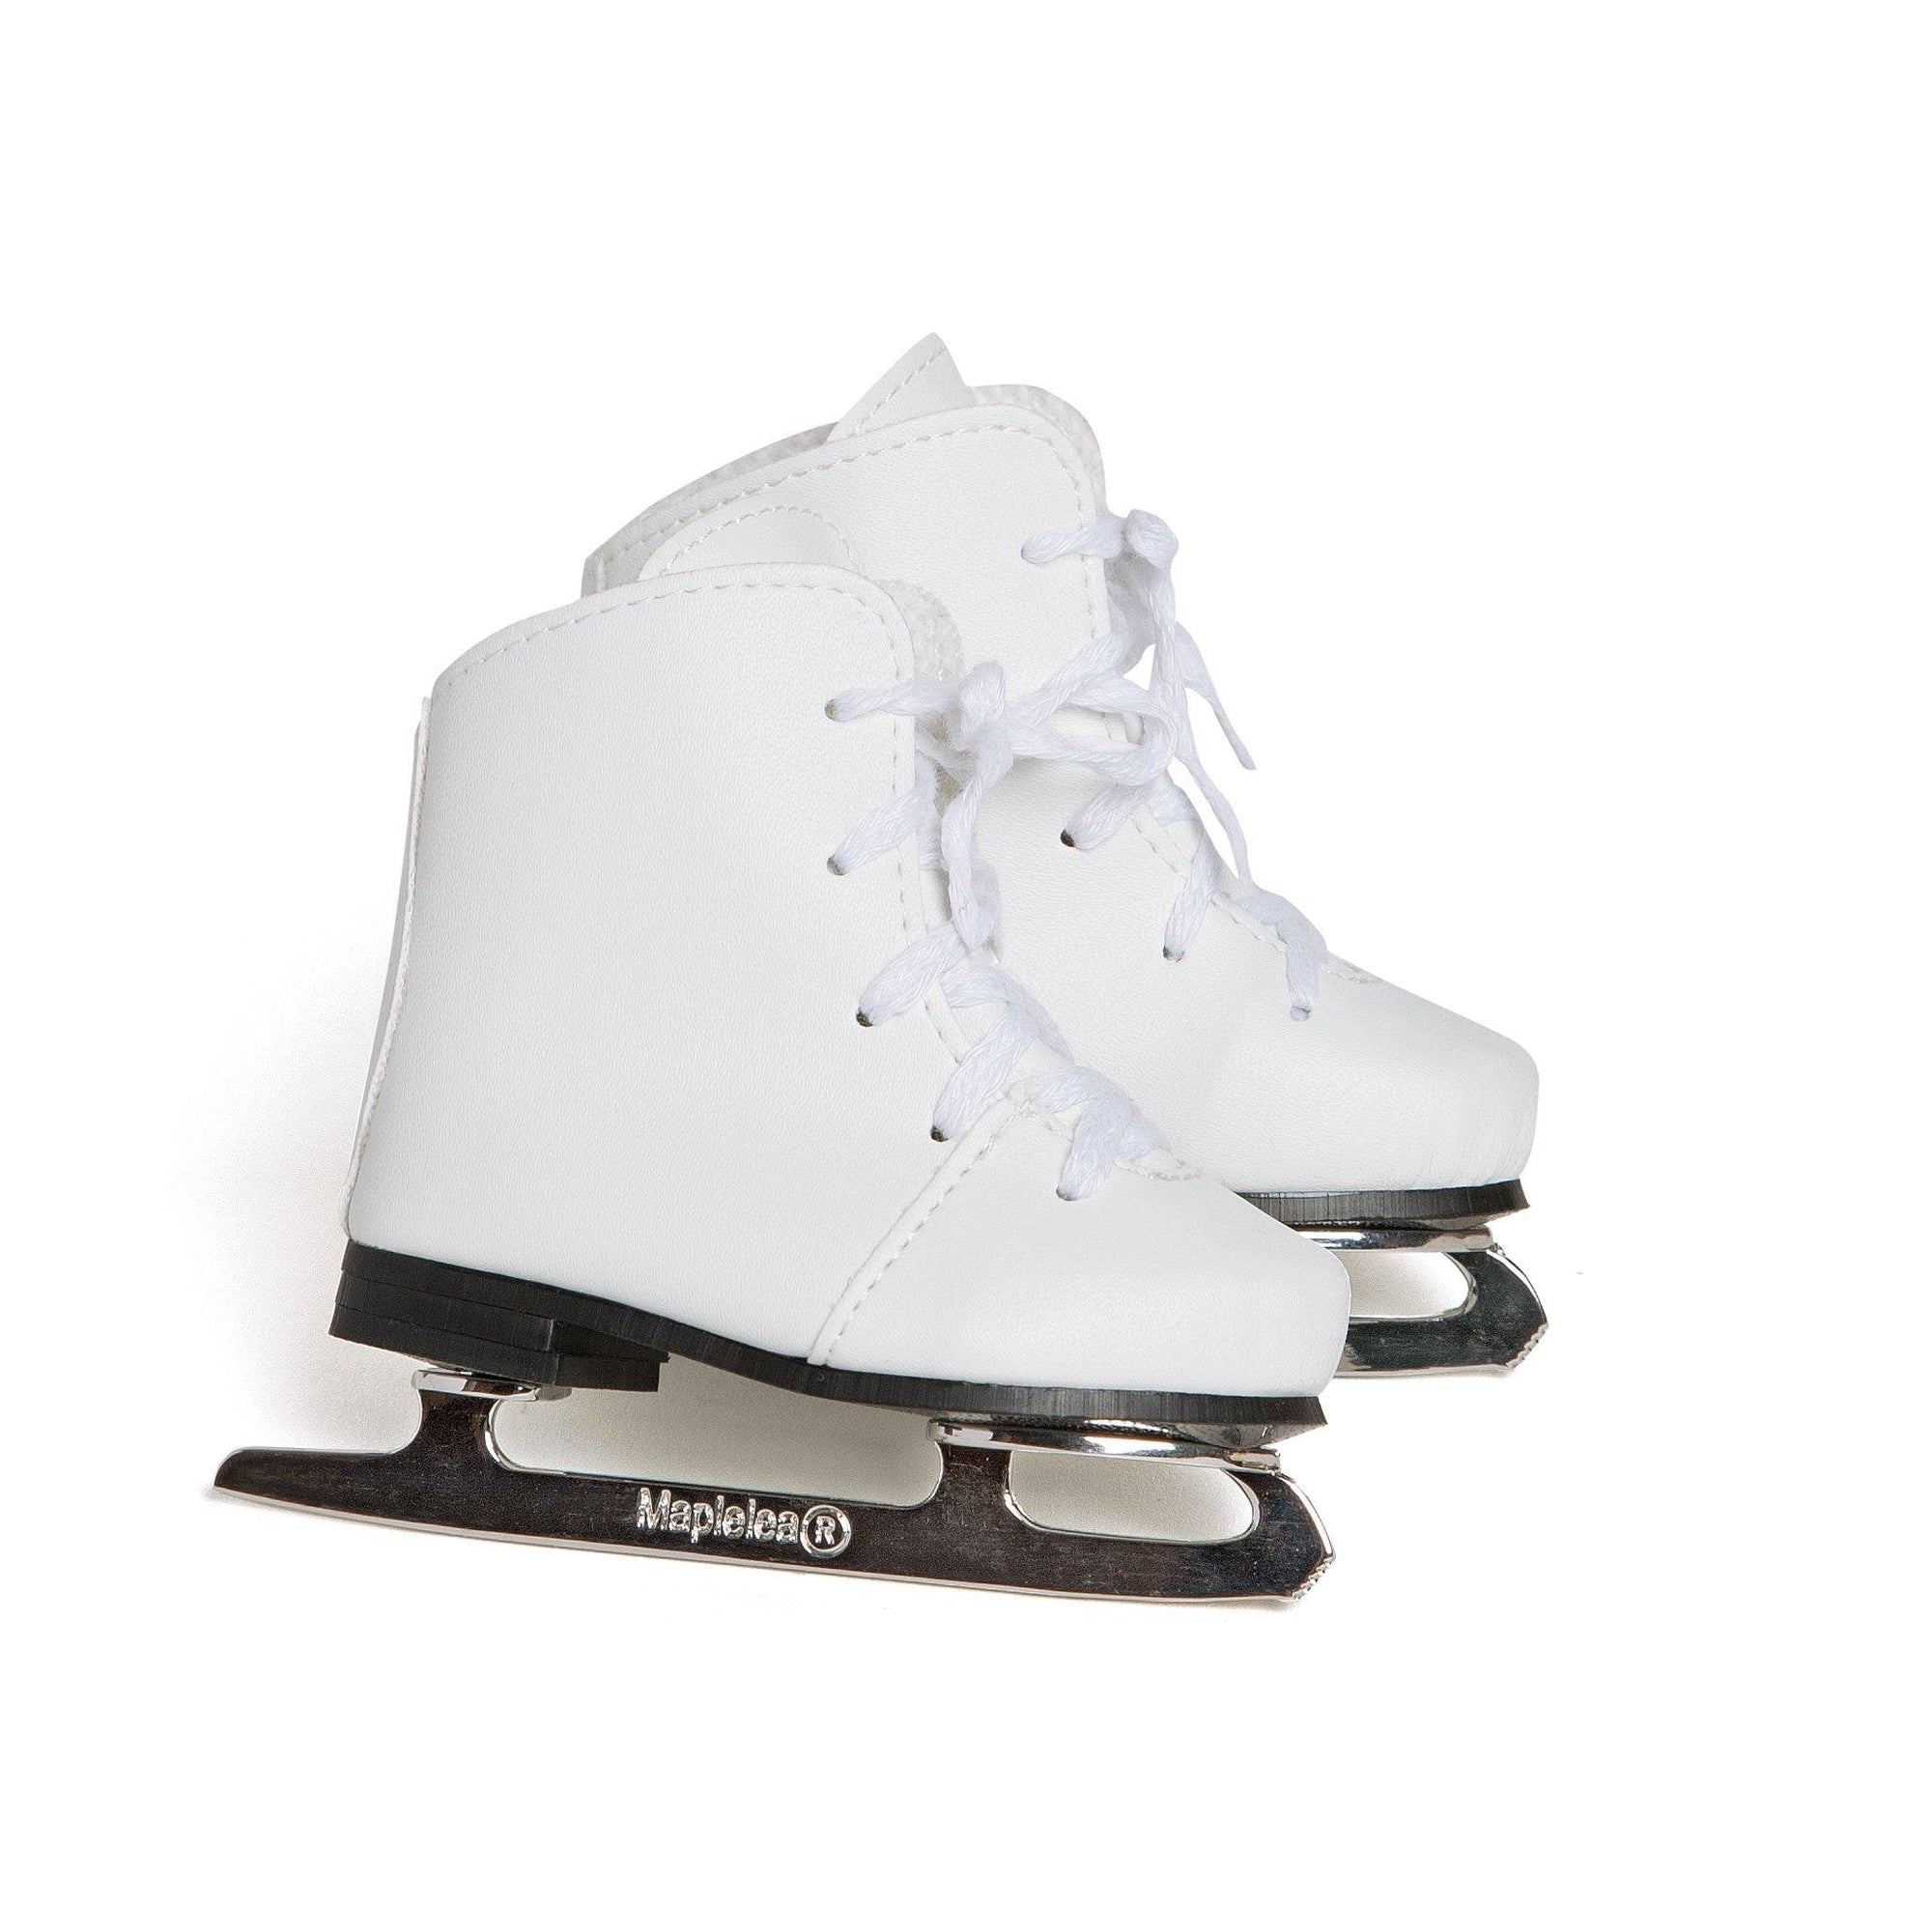 White figure skates fit all 18 inch dolls.   Amazing quality.